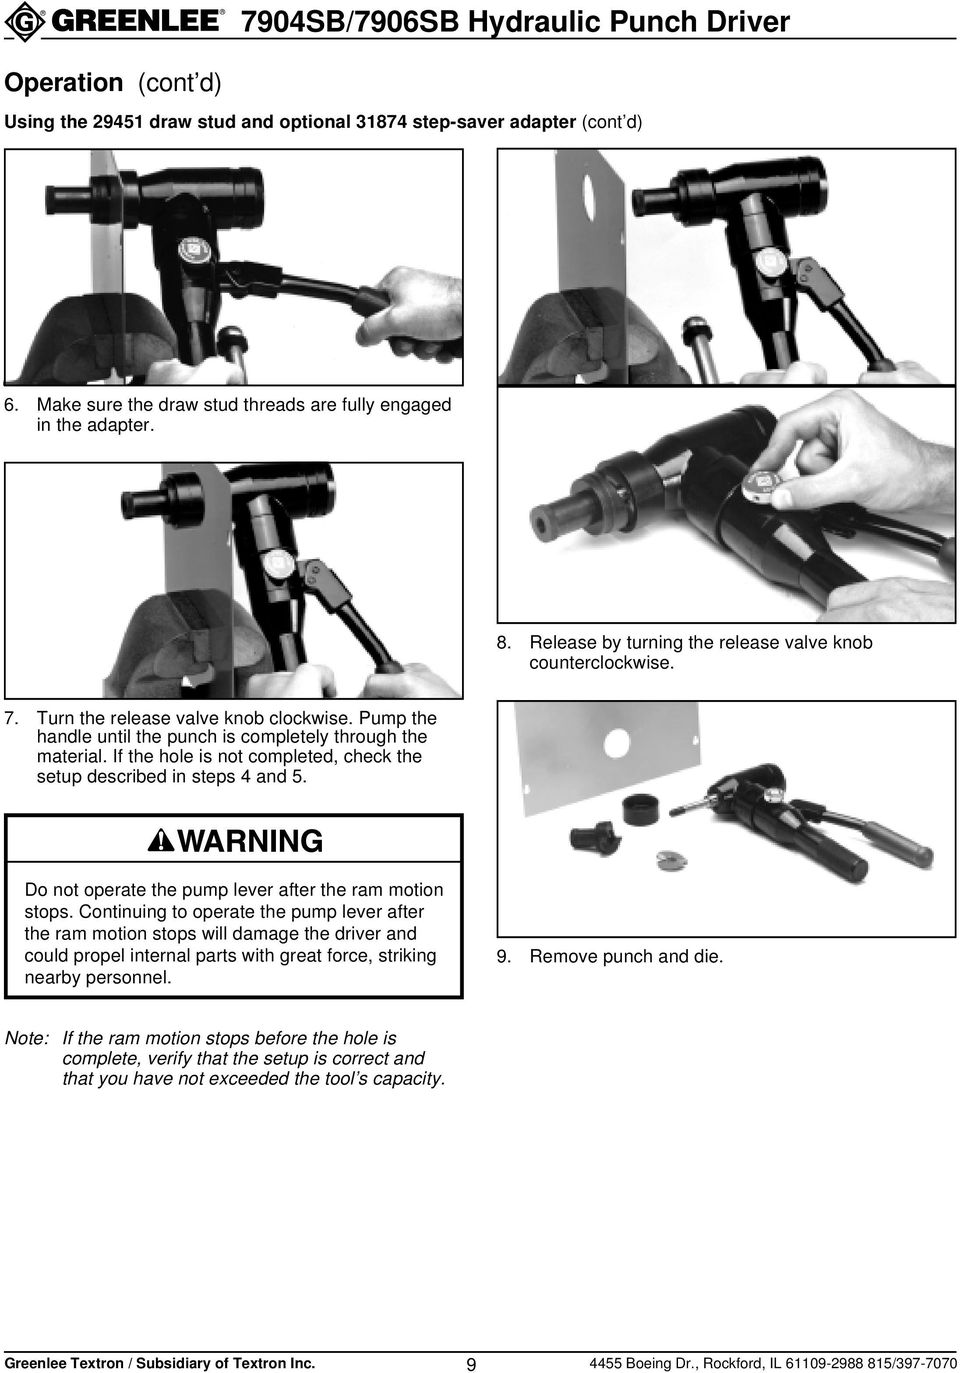 If the hole is not completed, check the setup described in steps 4 and 5. Do not operate the pump lever after the ram motion stops.